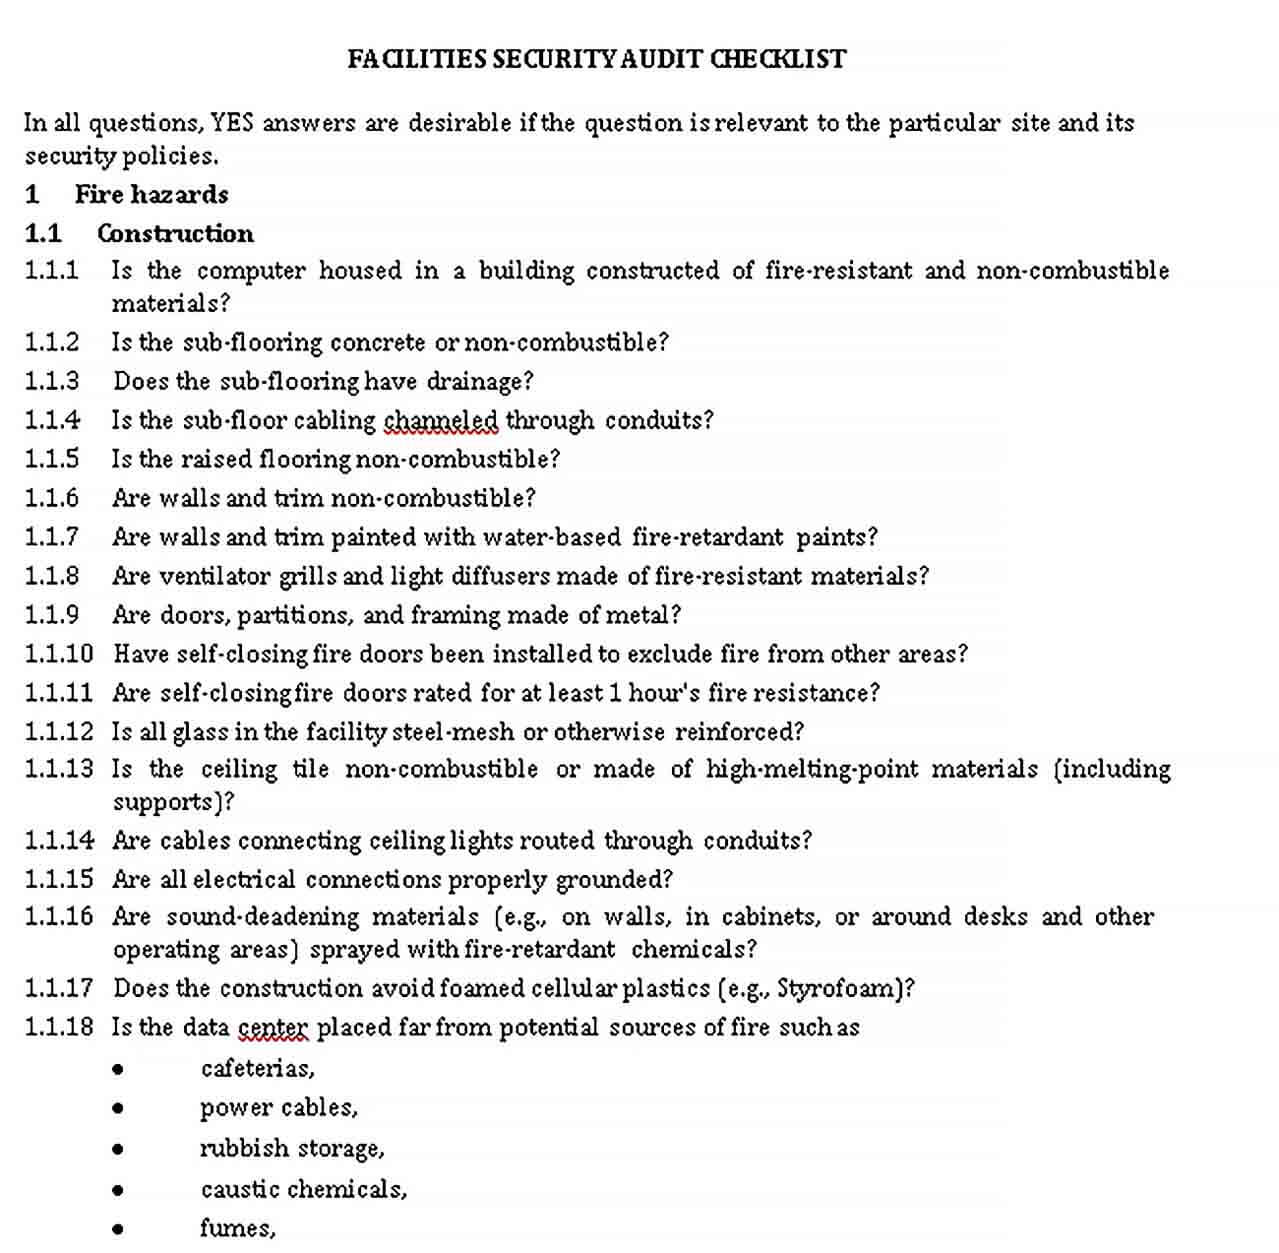 Sample Faculty and Security Audit Checklist Template